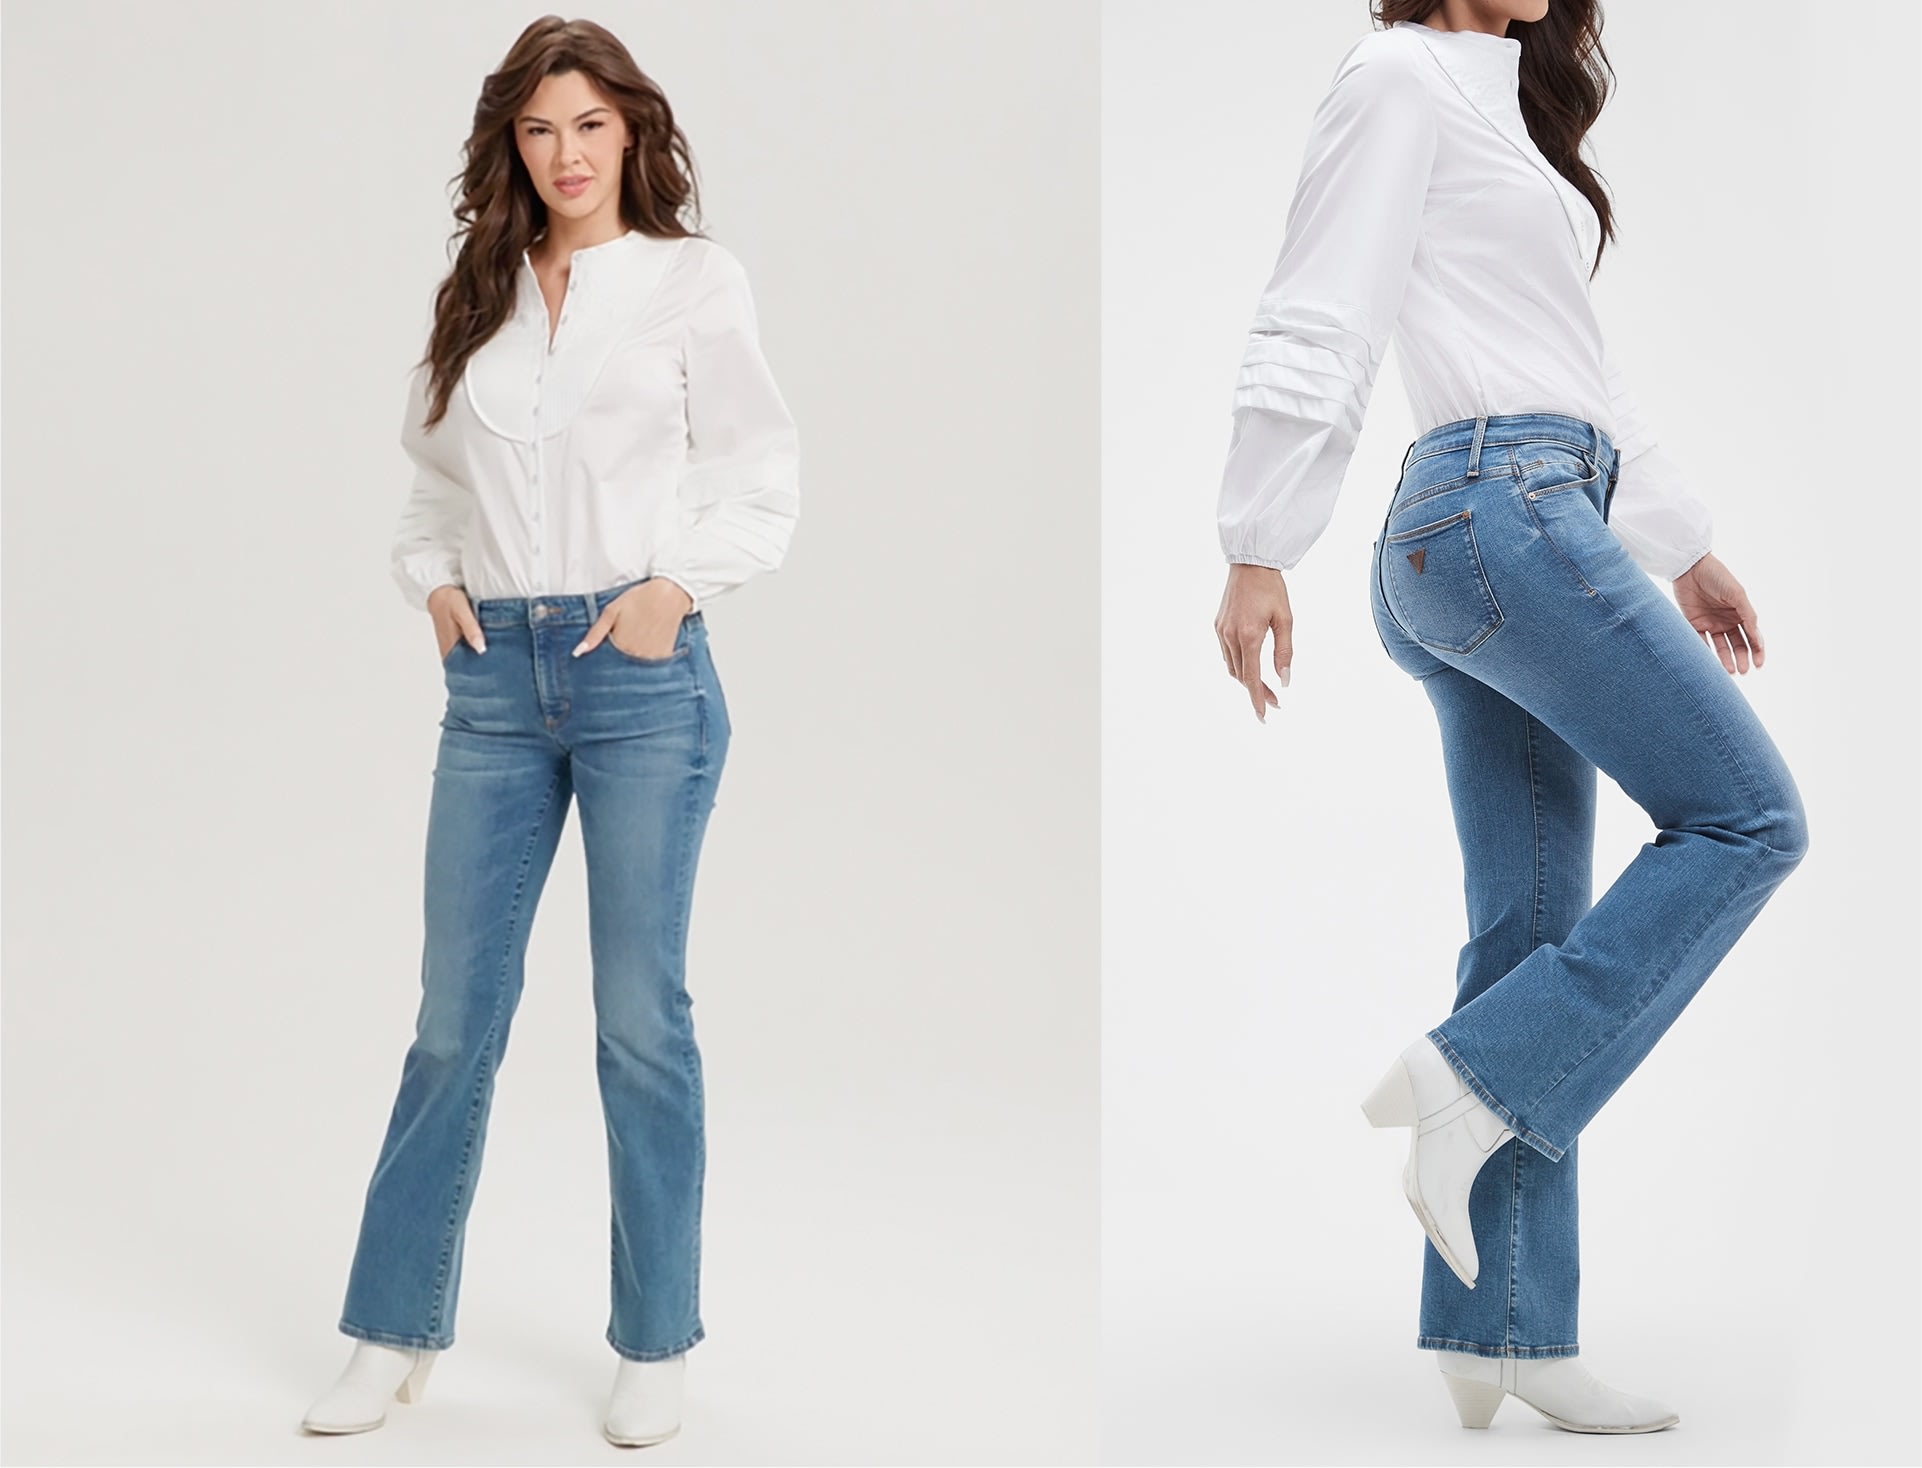 Shop Wide & Flare Jeans for Women